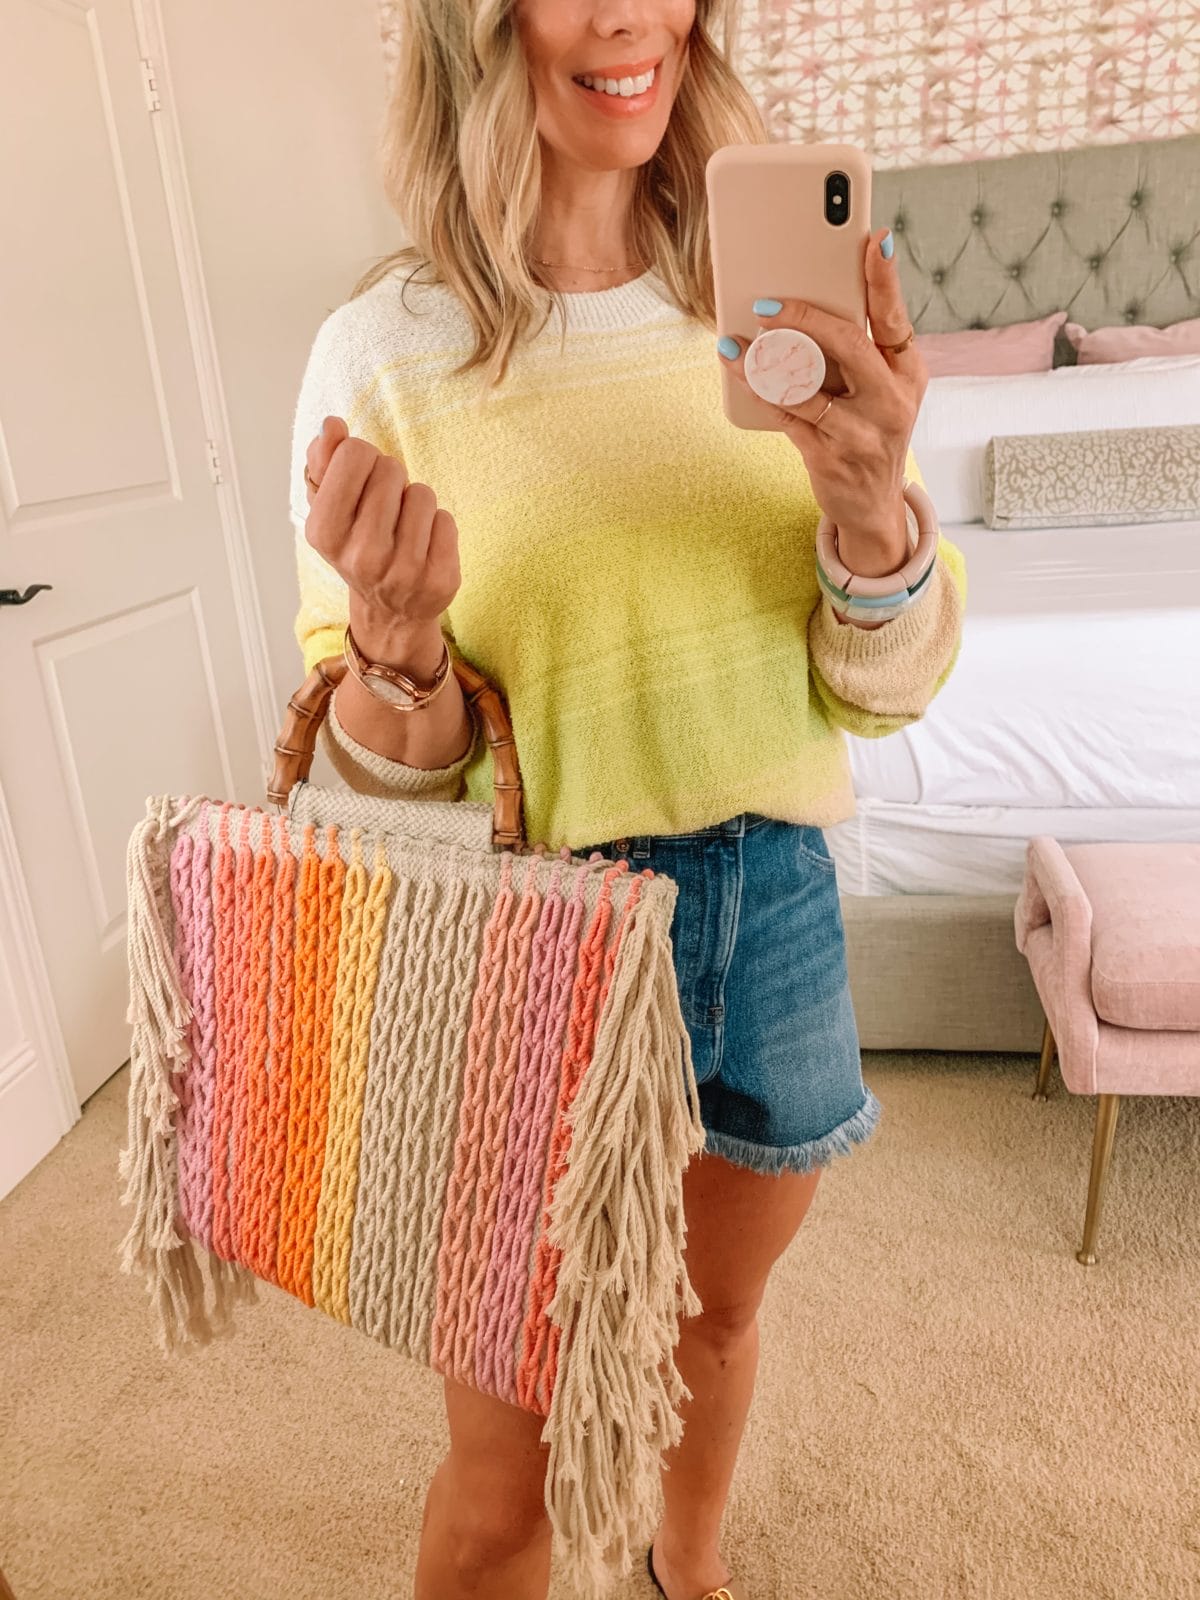 Dressing Room Finds, Walmart, Yellow Sweater, Shorts, Sandals, Rainbow Tote 